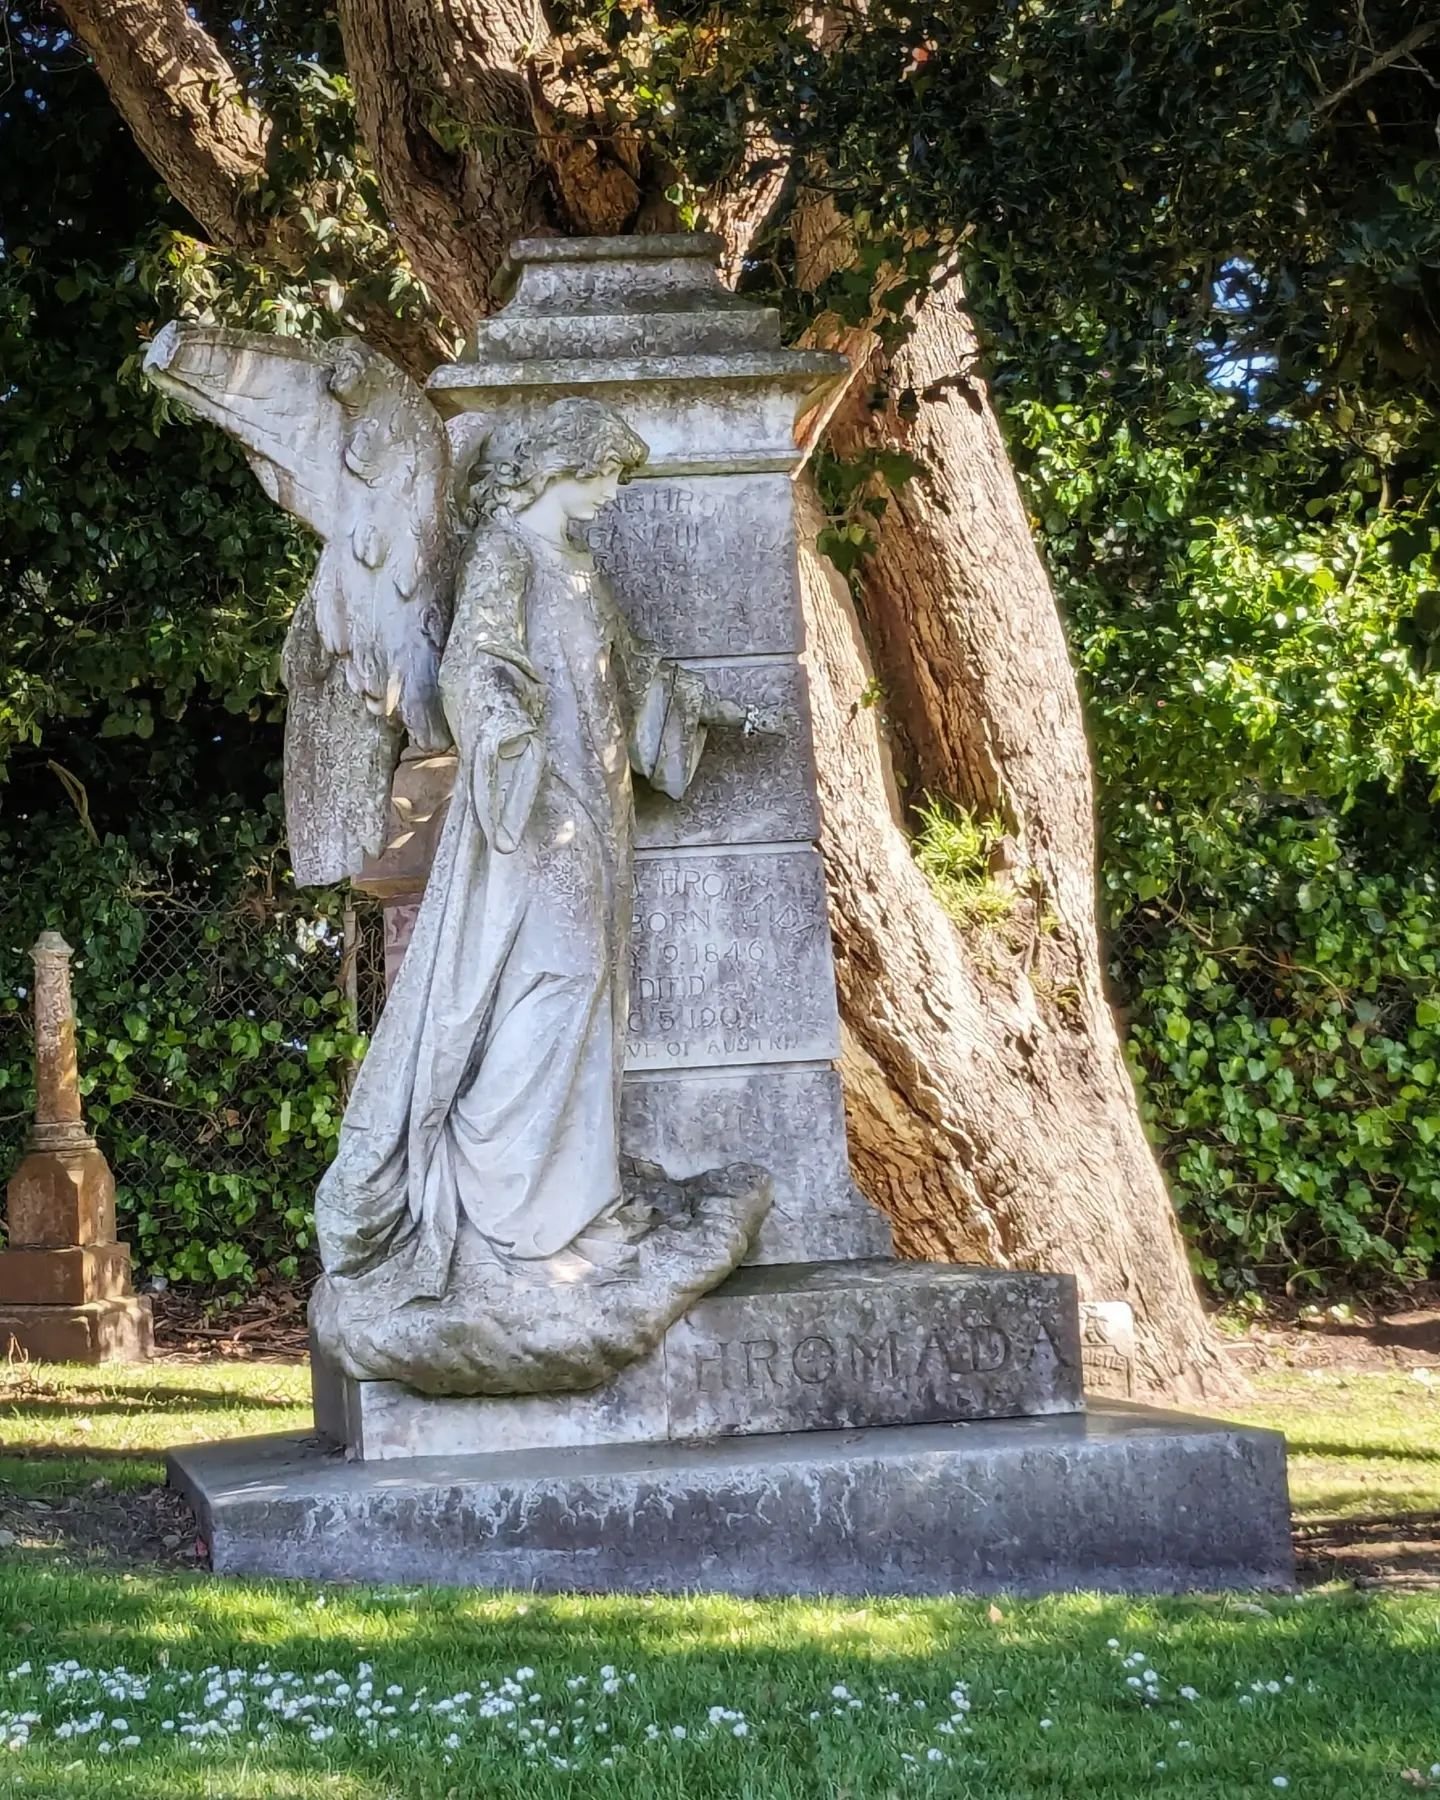 A few more angels &amp; others from Cypress Lawn. All these are in the older 'eastside' section. It's really a beautiful place.
.
.
.
#cypresslawn #cemetery #cemeteries #graveyard #sanfrancisco #sanfranciscohistory #californiahistory #taphophile #tap